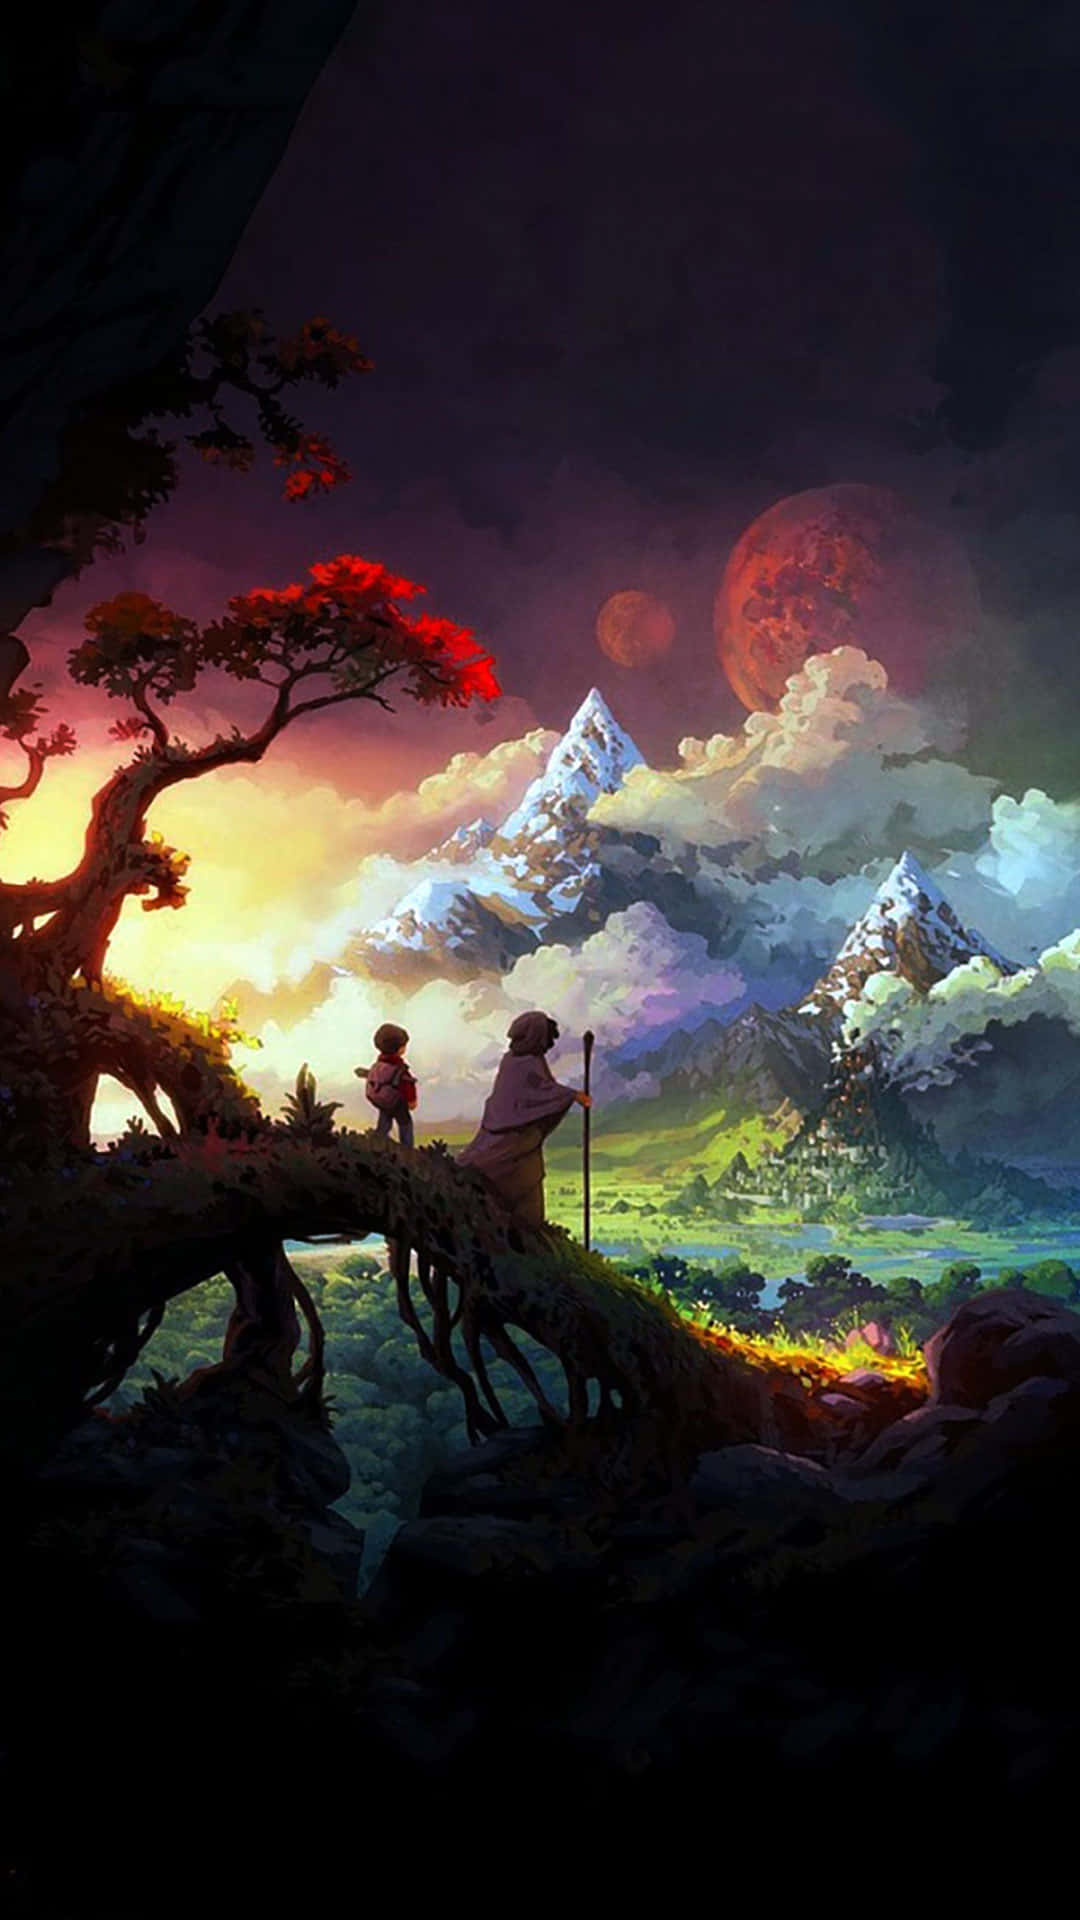 A Man And Woman Standing On A Mountain With A Sunset Behind Them Wallpaper